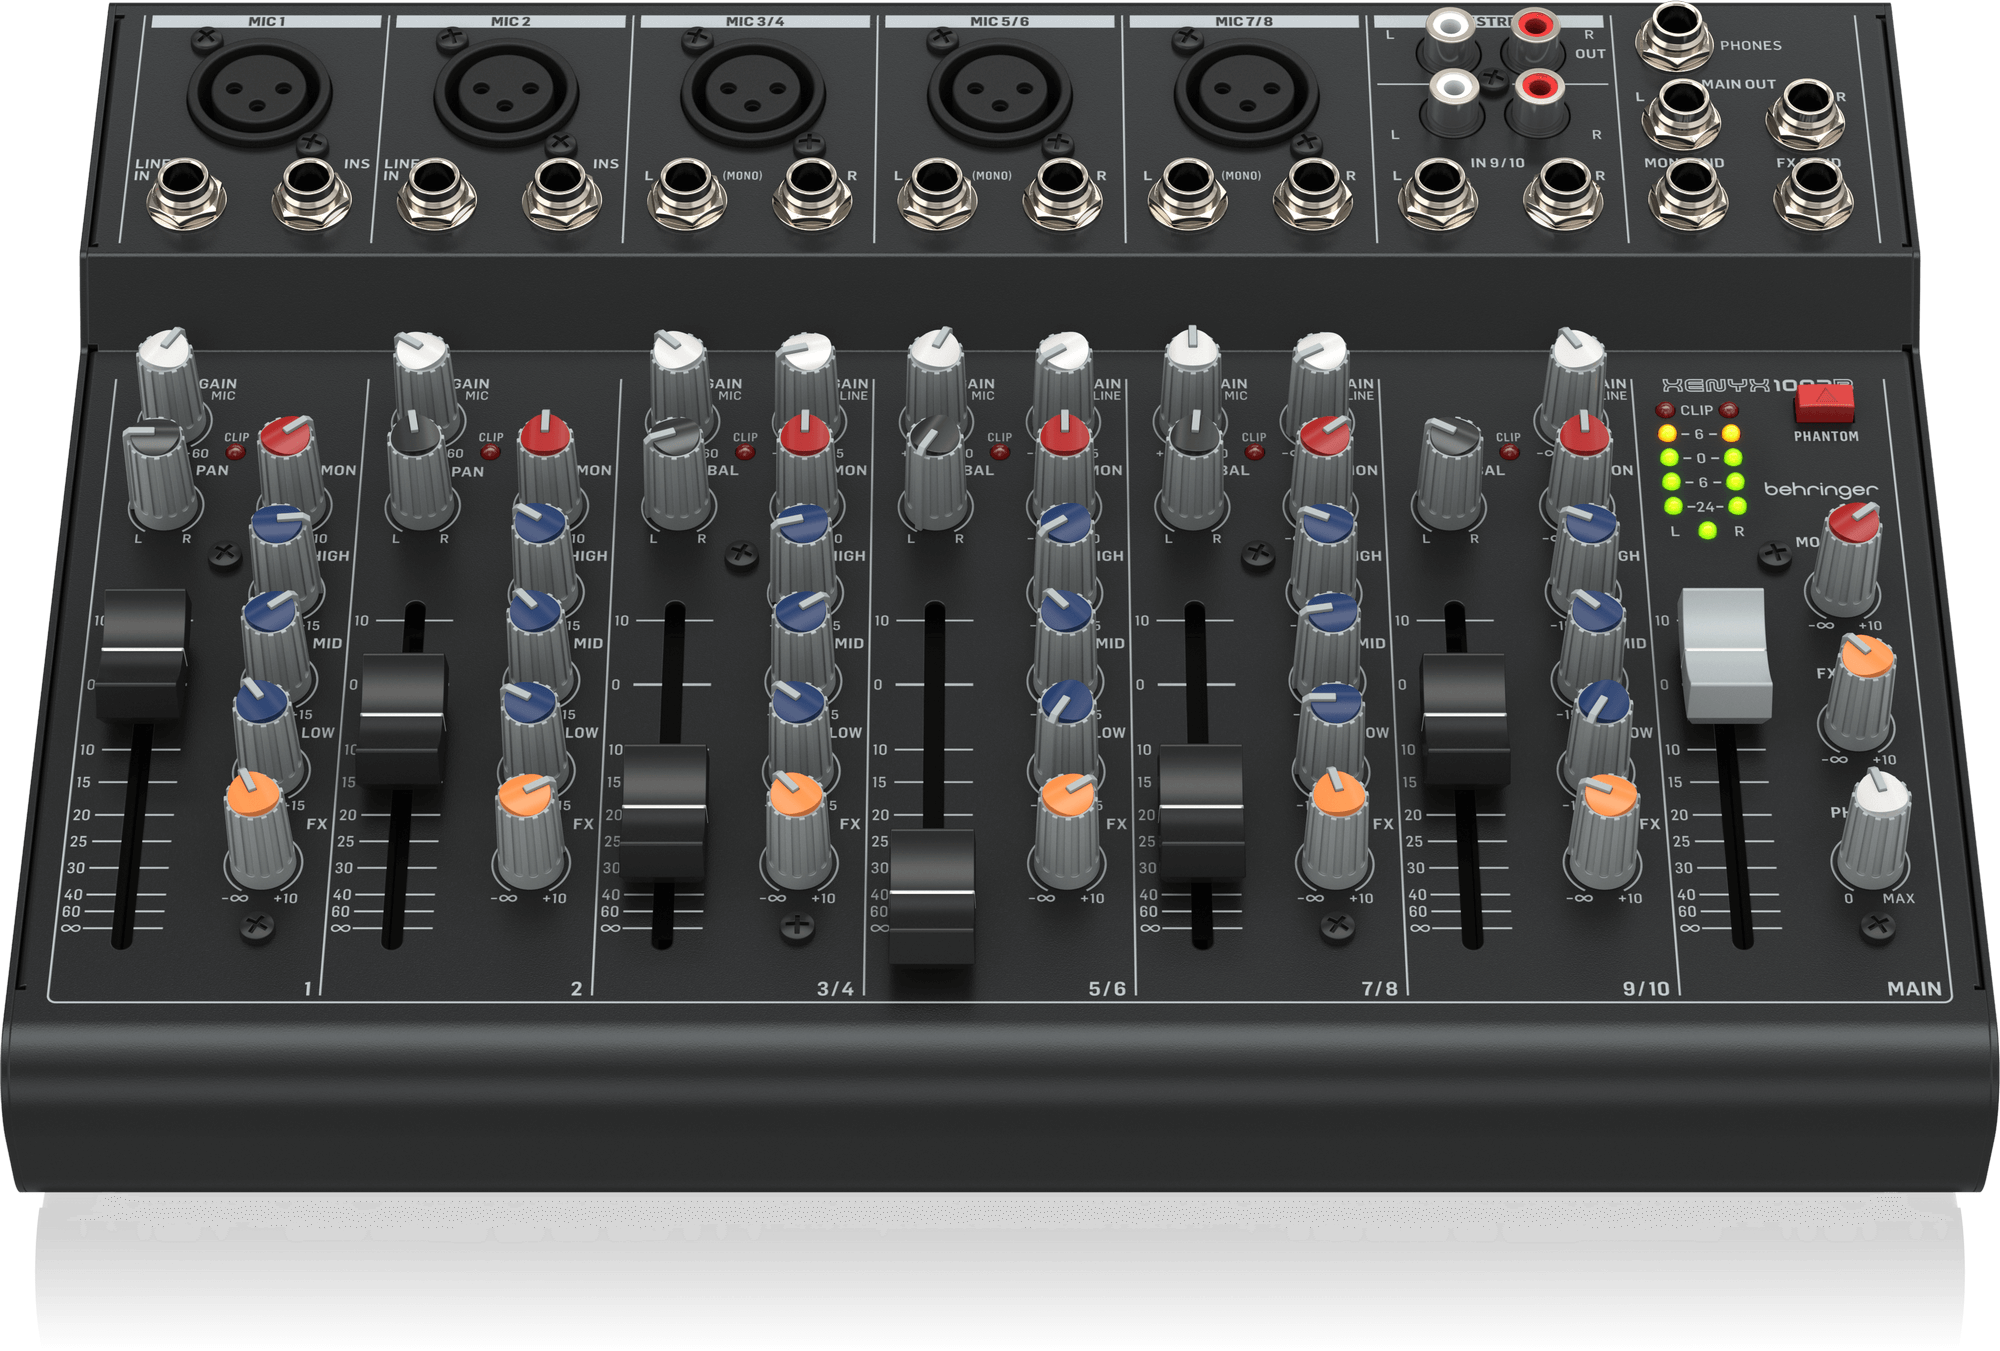 Behringer | Product | XENYX 1003B